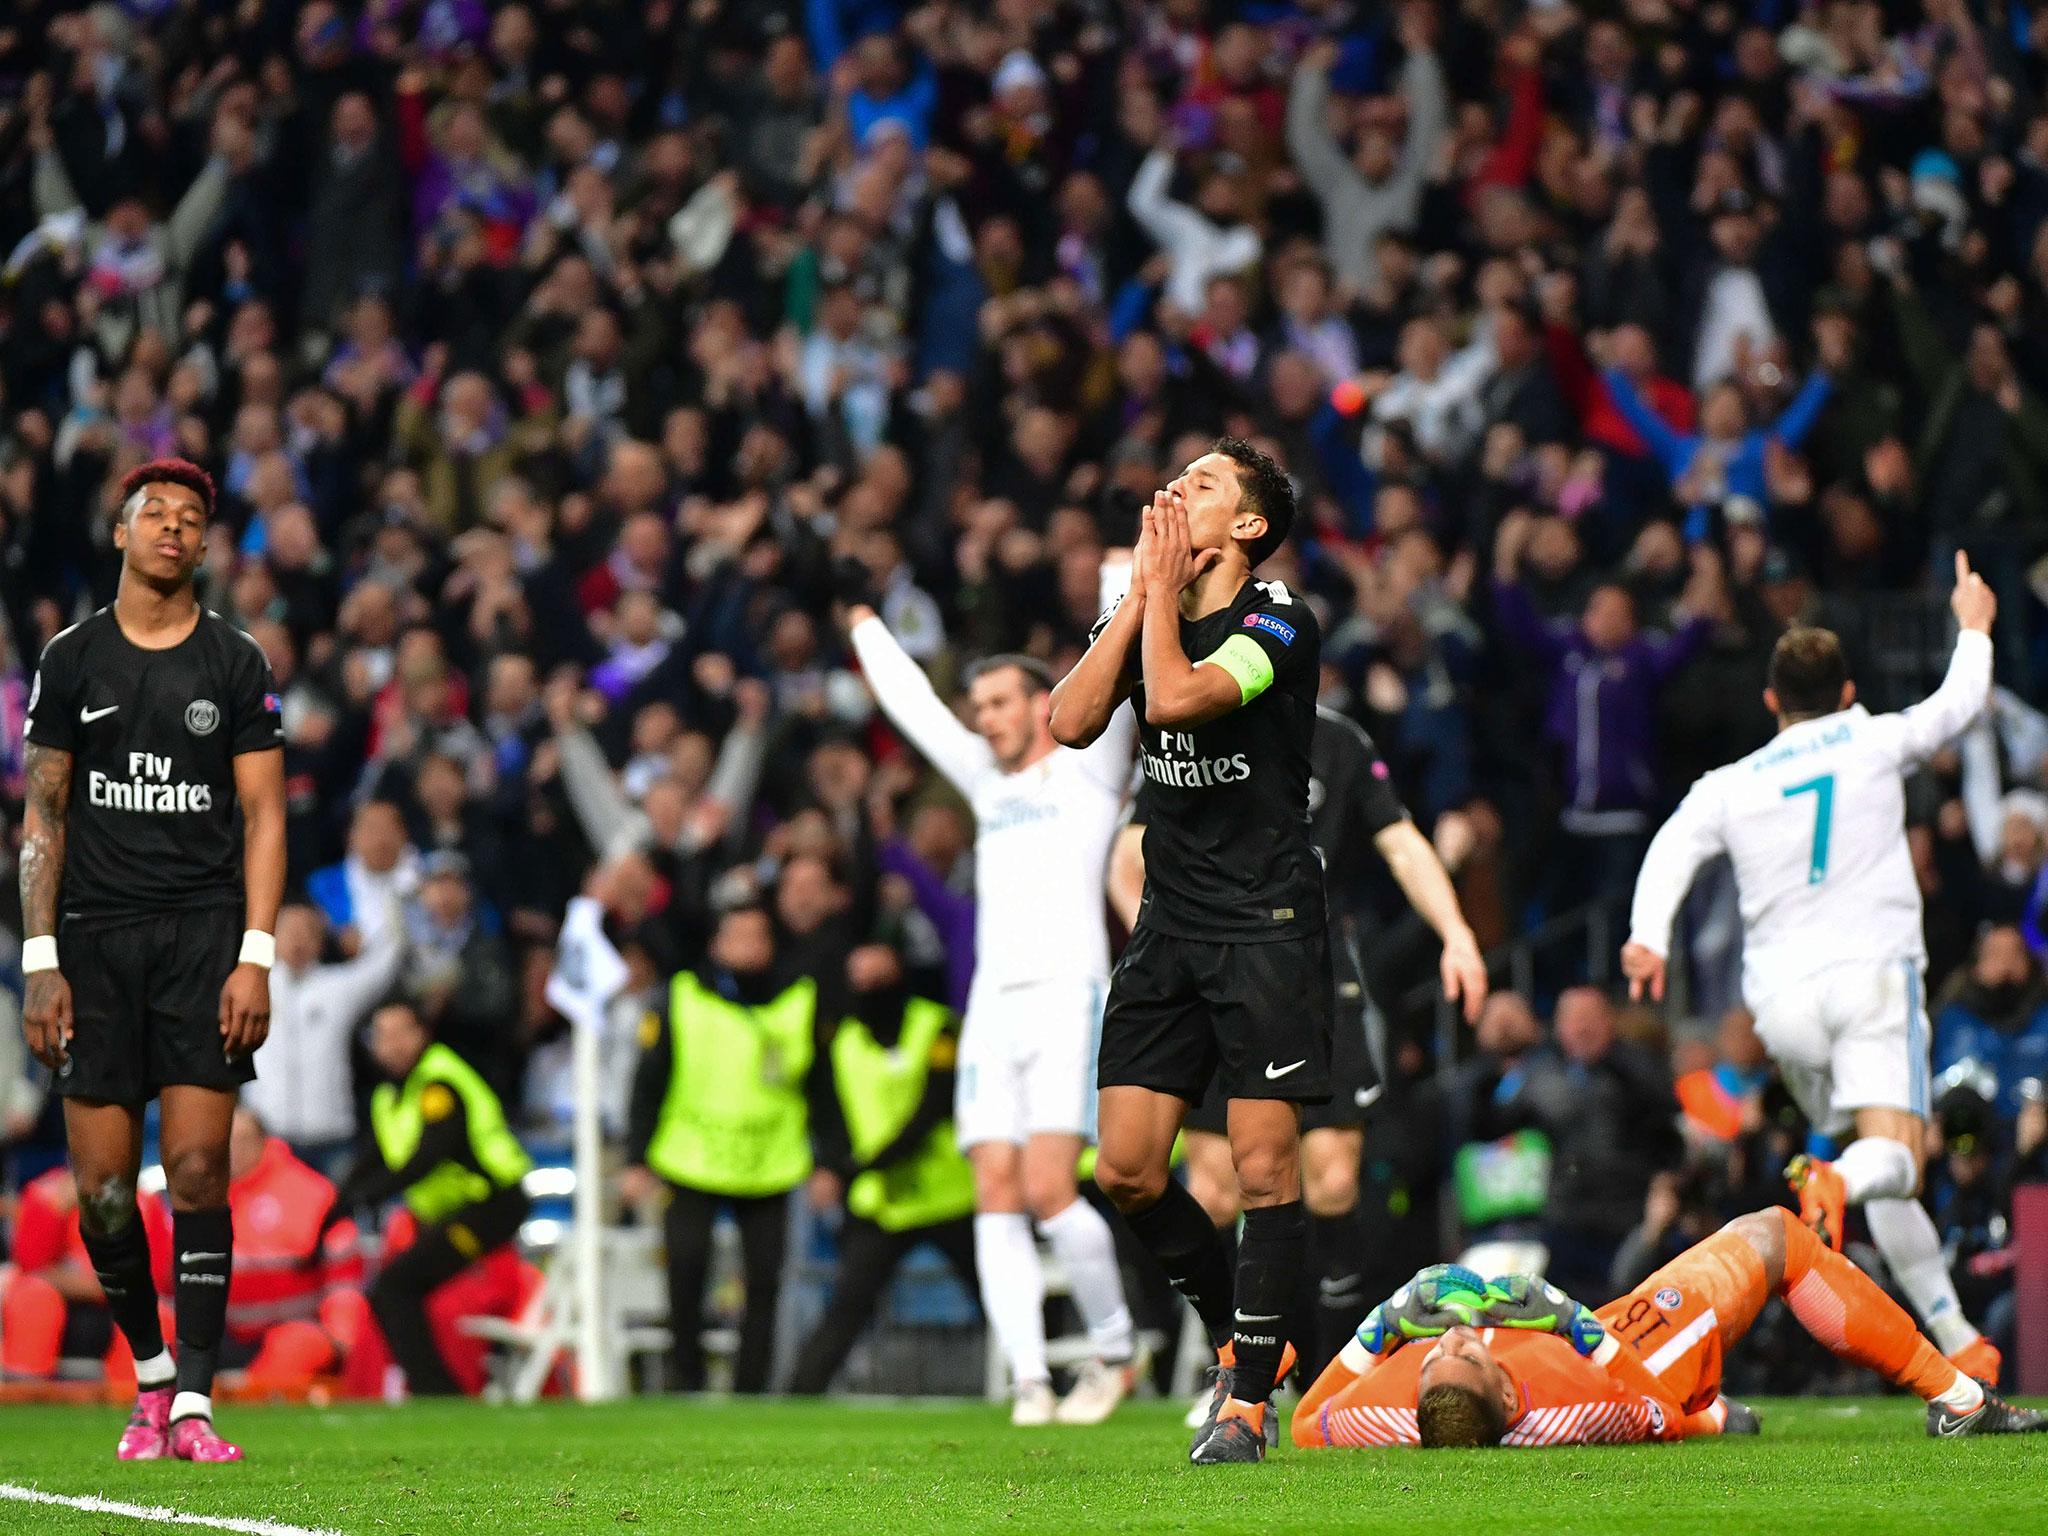 PSG conceded two late goals at the Bernabeu in the first-leg tie